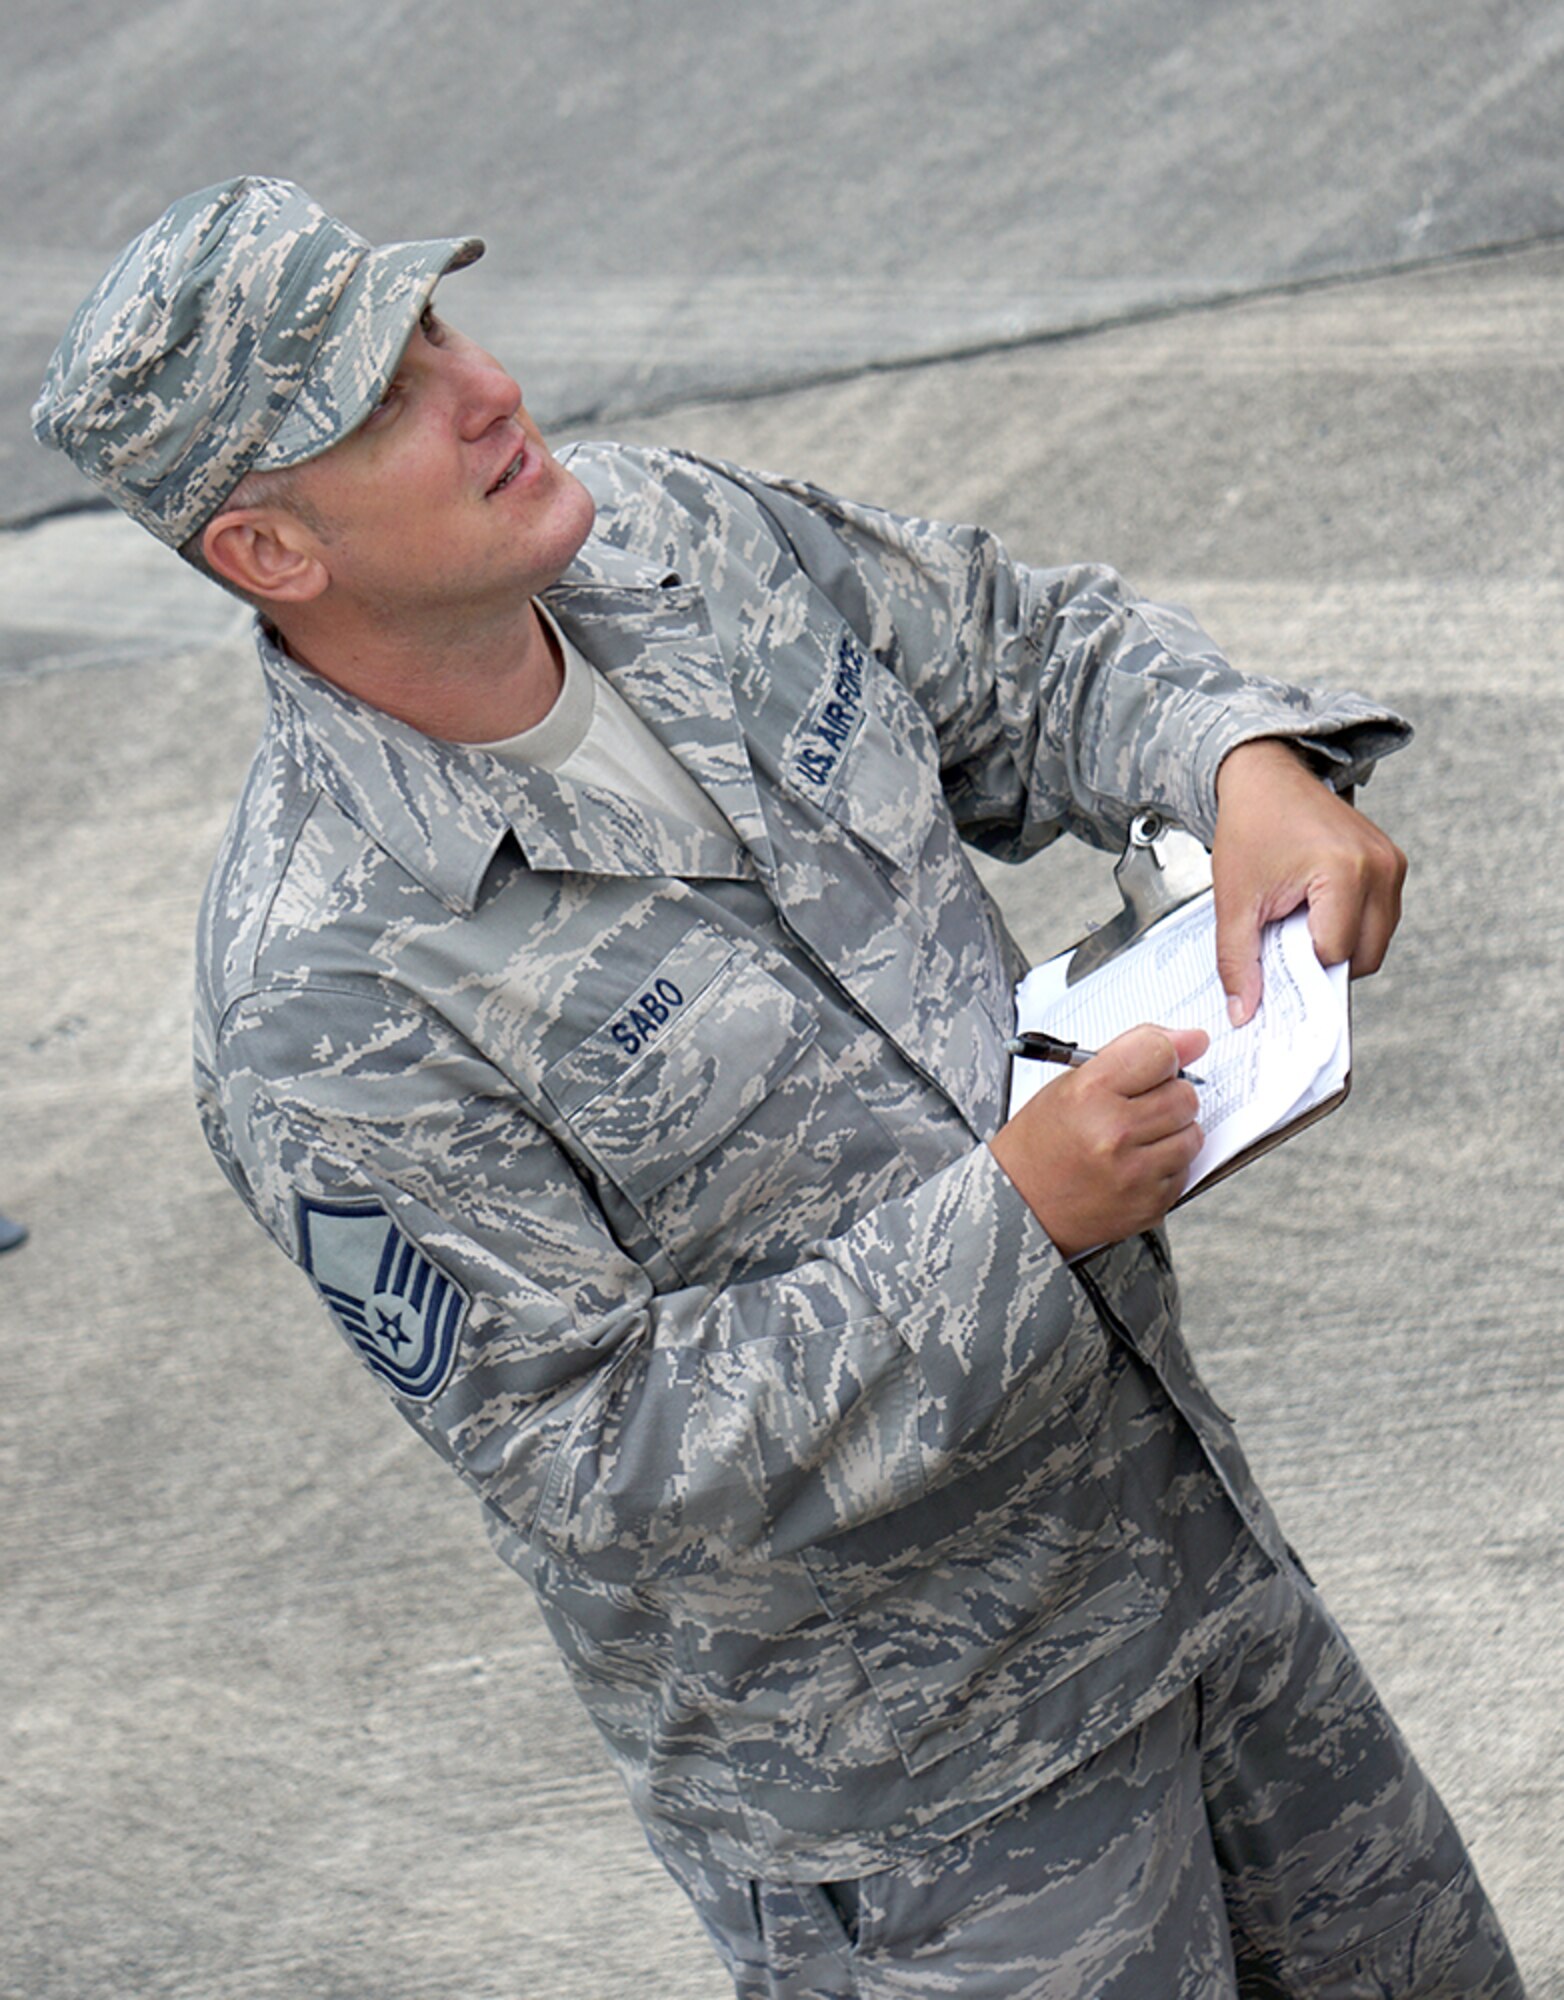 Robins Air Force Base was teeming with activity as Hurricane Irma approached Florida last week. At the FEMA Fuel Staging Area on base, Master Sgt. Jeff Sabo, from Great Falls, Montana and Task Force Americas quality assurance representative, records FEMA's transponder serial numbers to ensure accountability of the fuel movement to FEMA’s forward staging base. (U.S. Air Force photo/ED ASPERA)